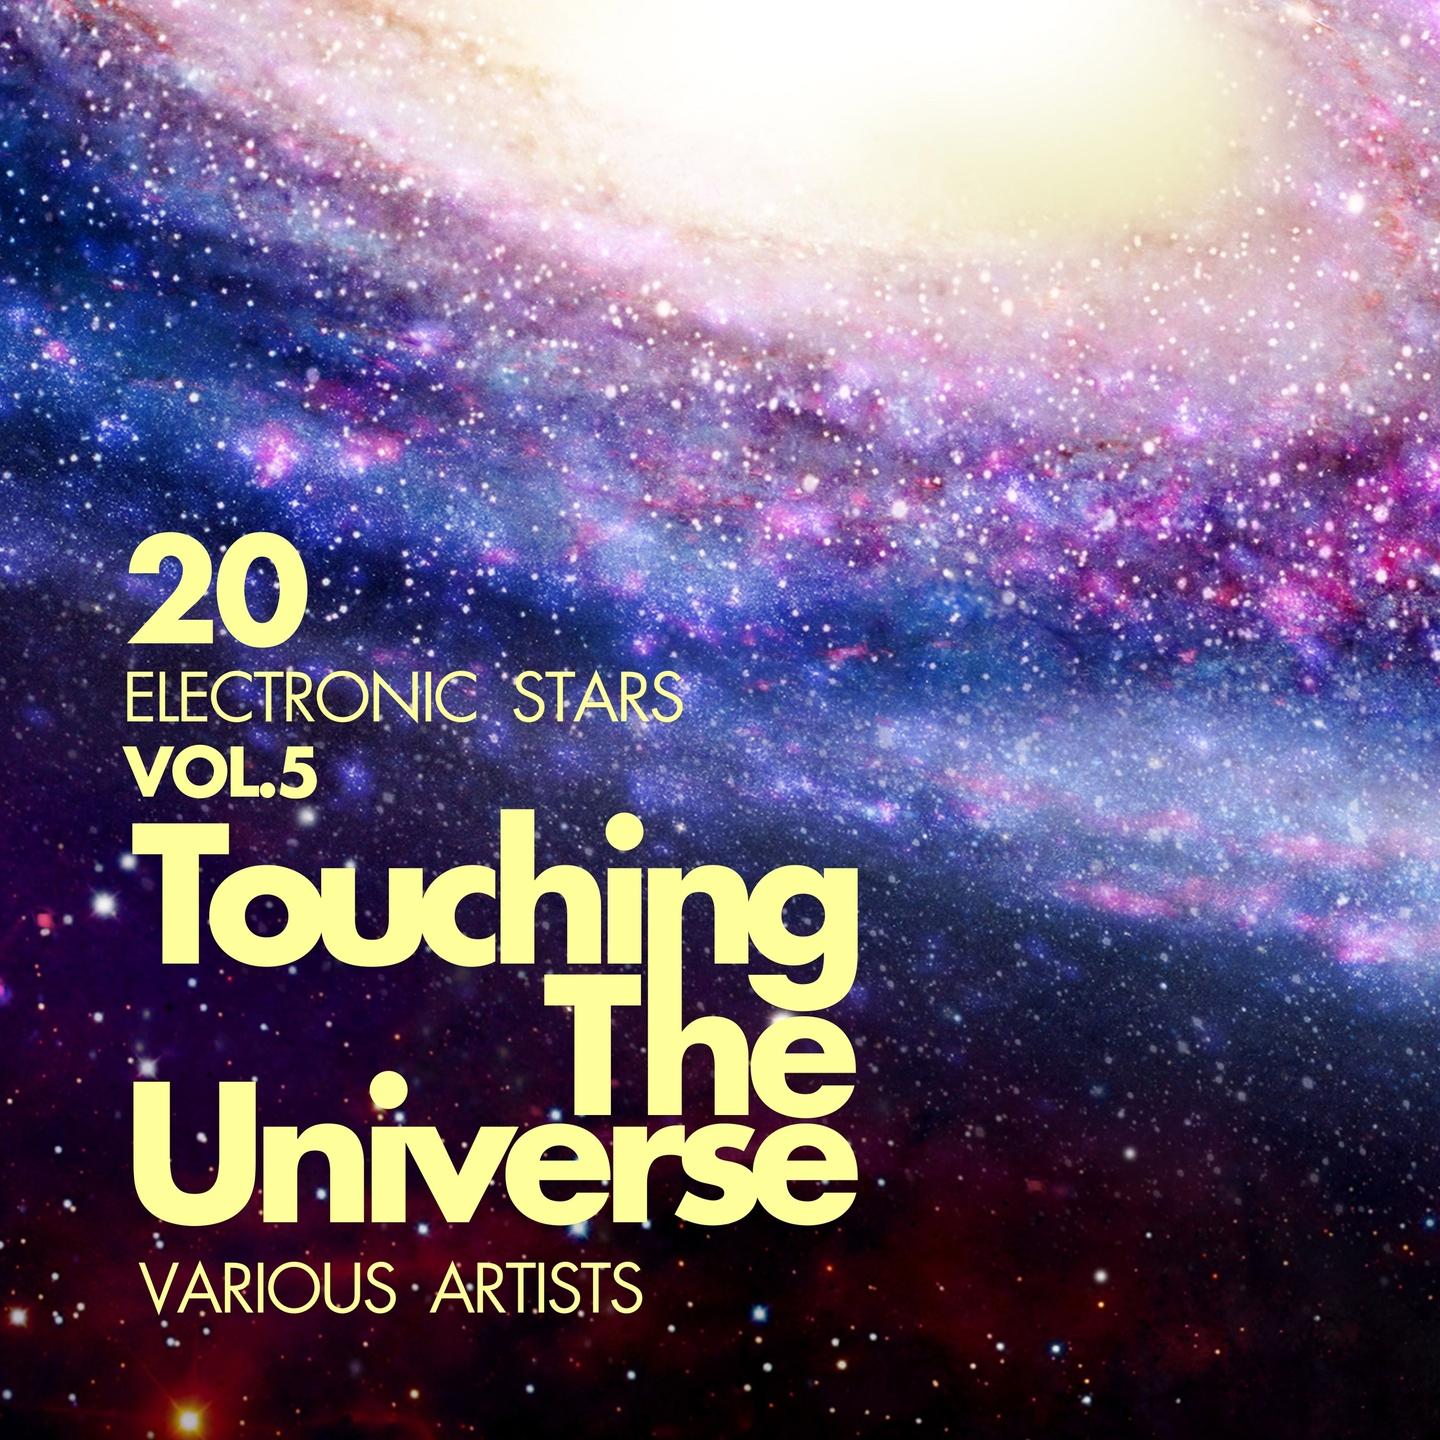 Touching The Universe, Vol. 5 (20 Electronic Stars)